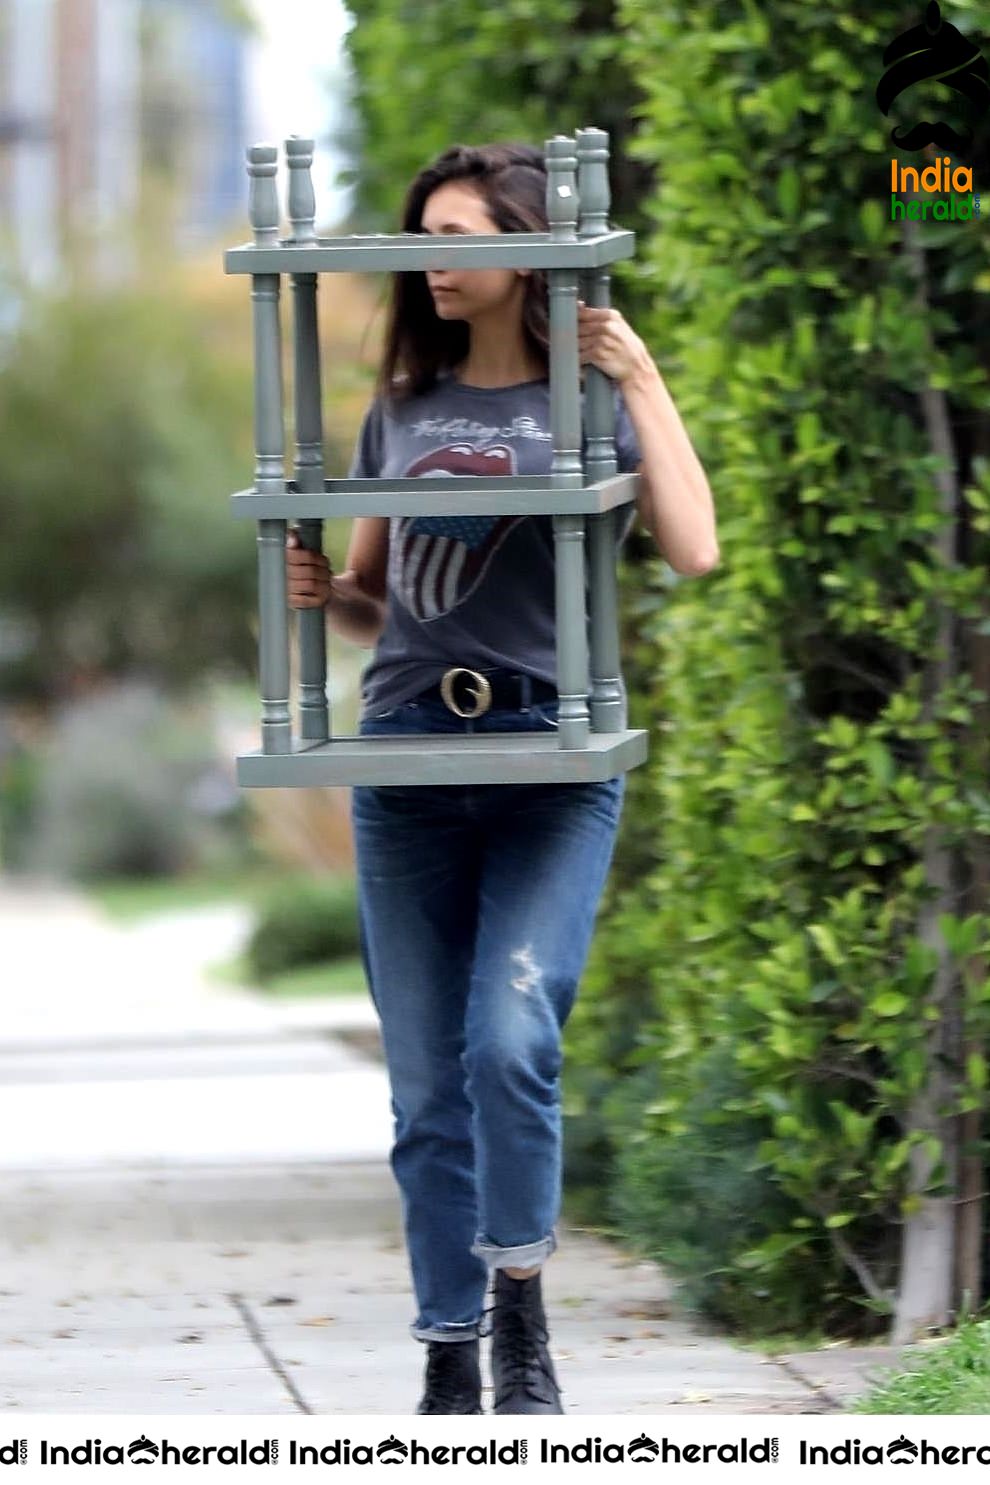 Nina Dobrev caught by Paparazzi while carrying furniture to a car in Los Angeles